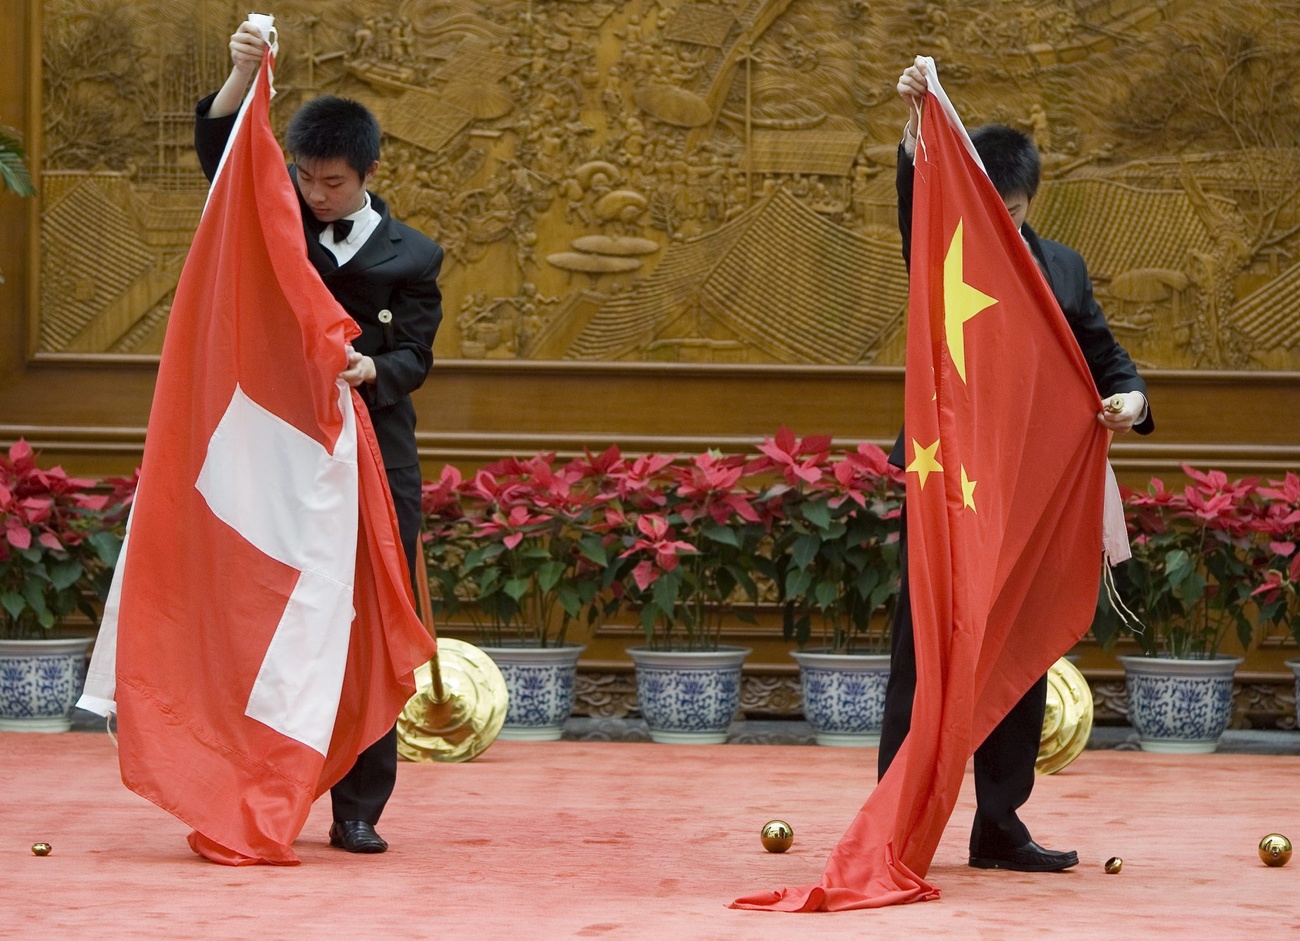 Swiss and Chinese flags